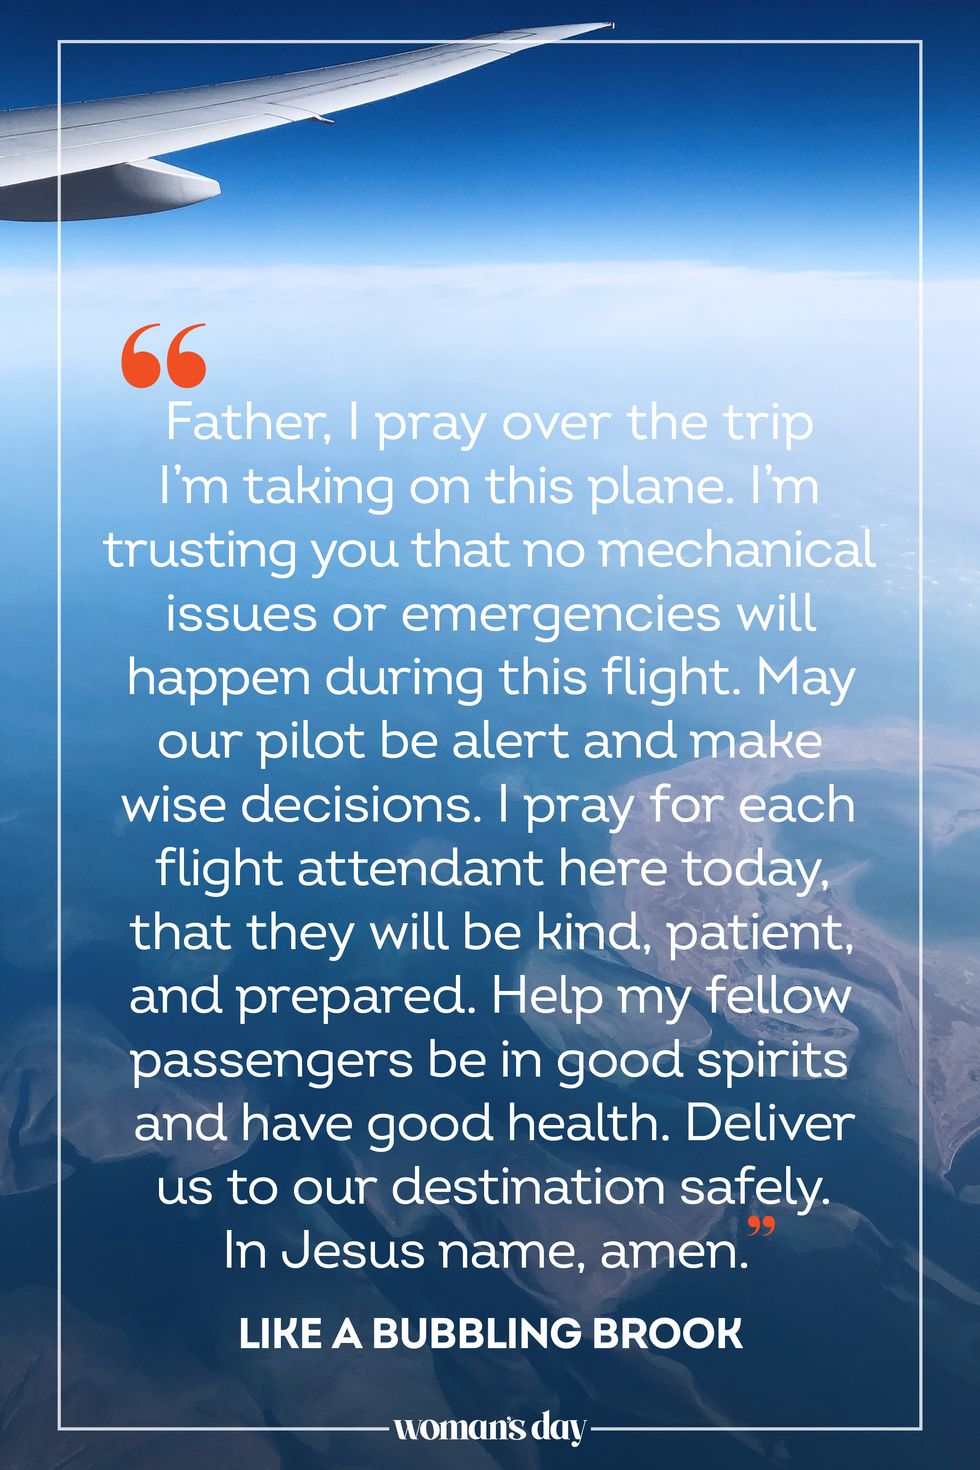 prayer for safe travel like a bubbling brook